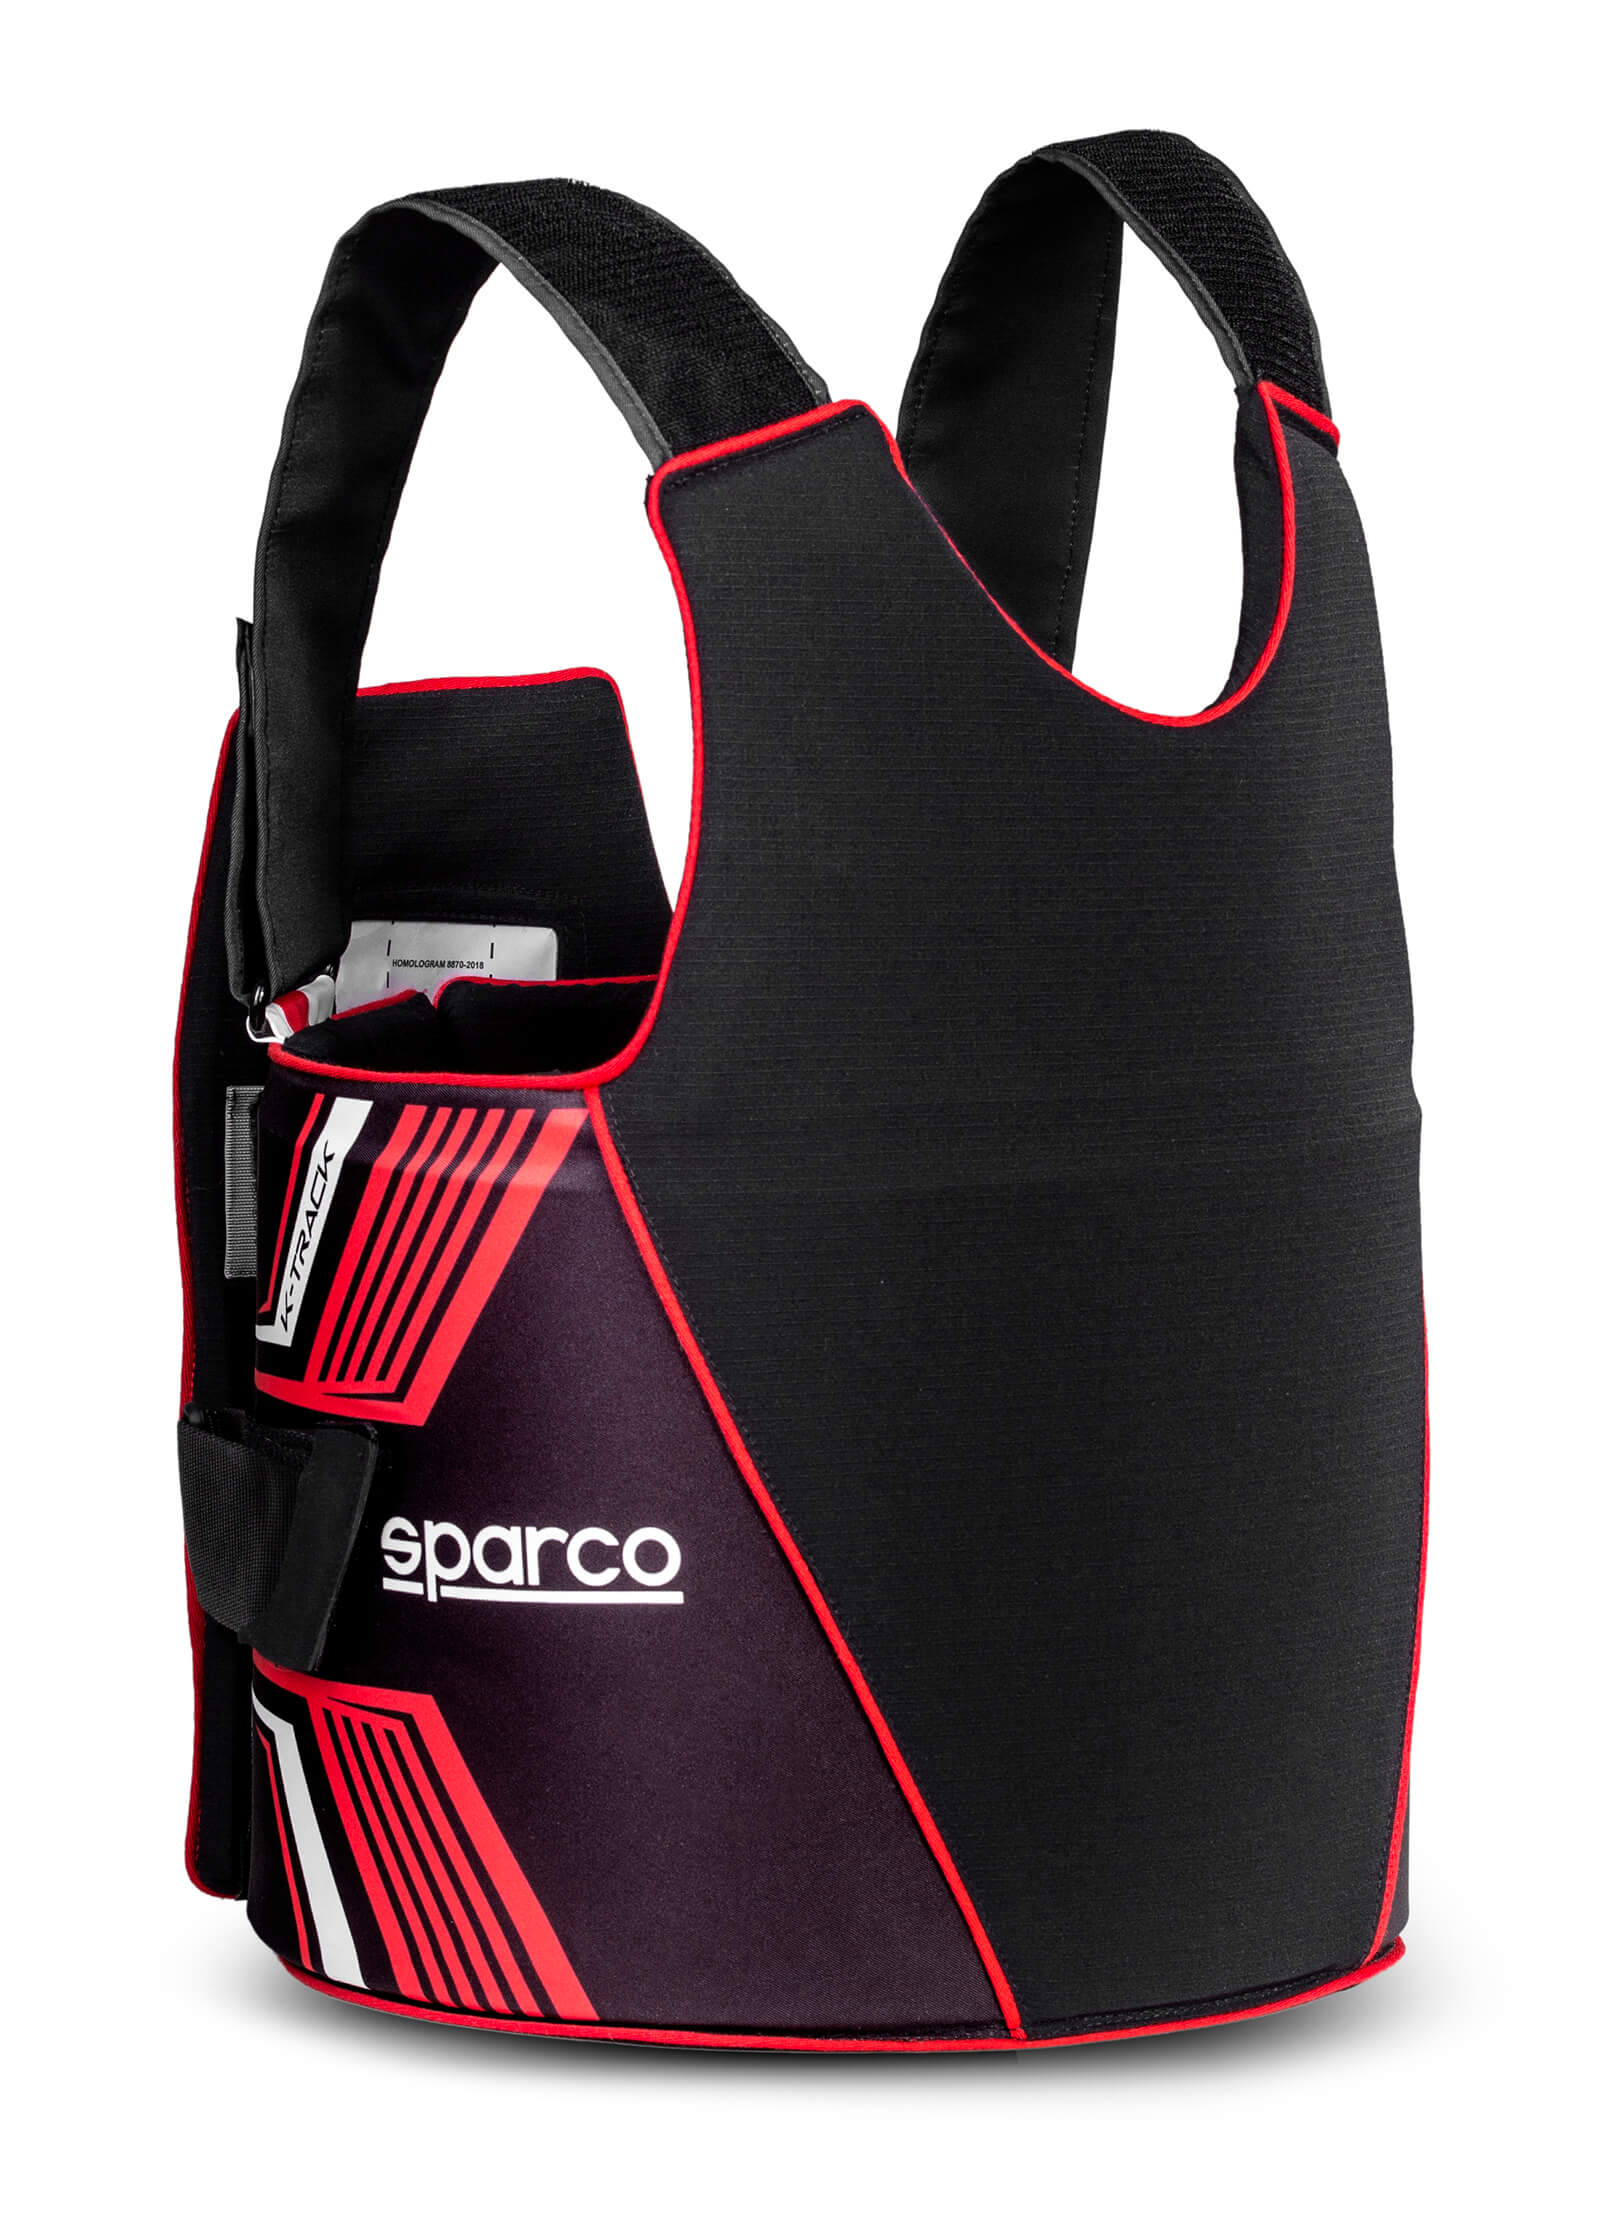 SPARCO 002406KNRRS2S K-TRACK Karting Rib Protector, FIA 8870-2018, black/red, size S Photo-2 